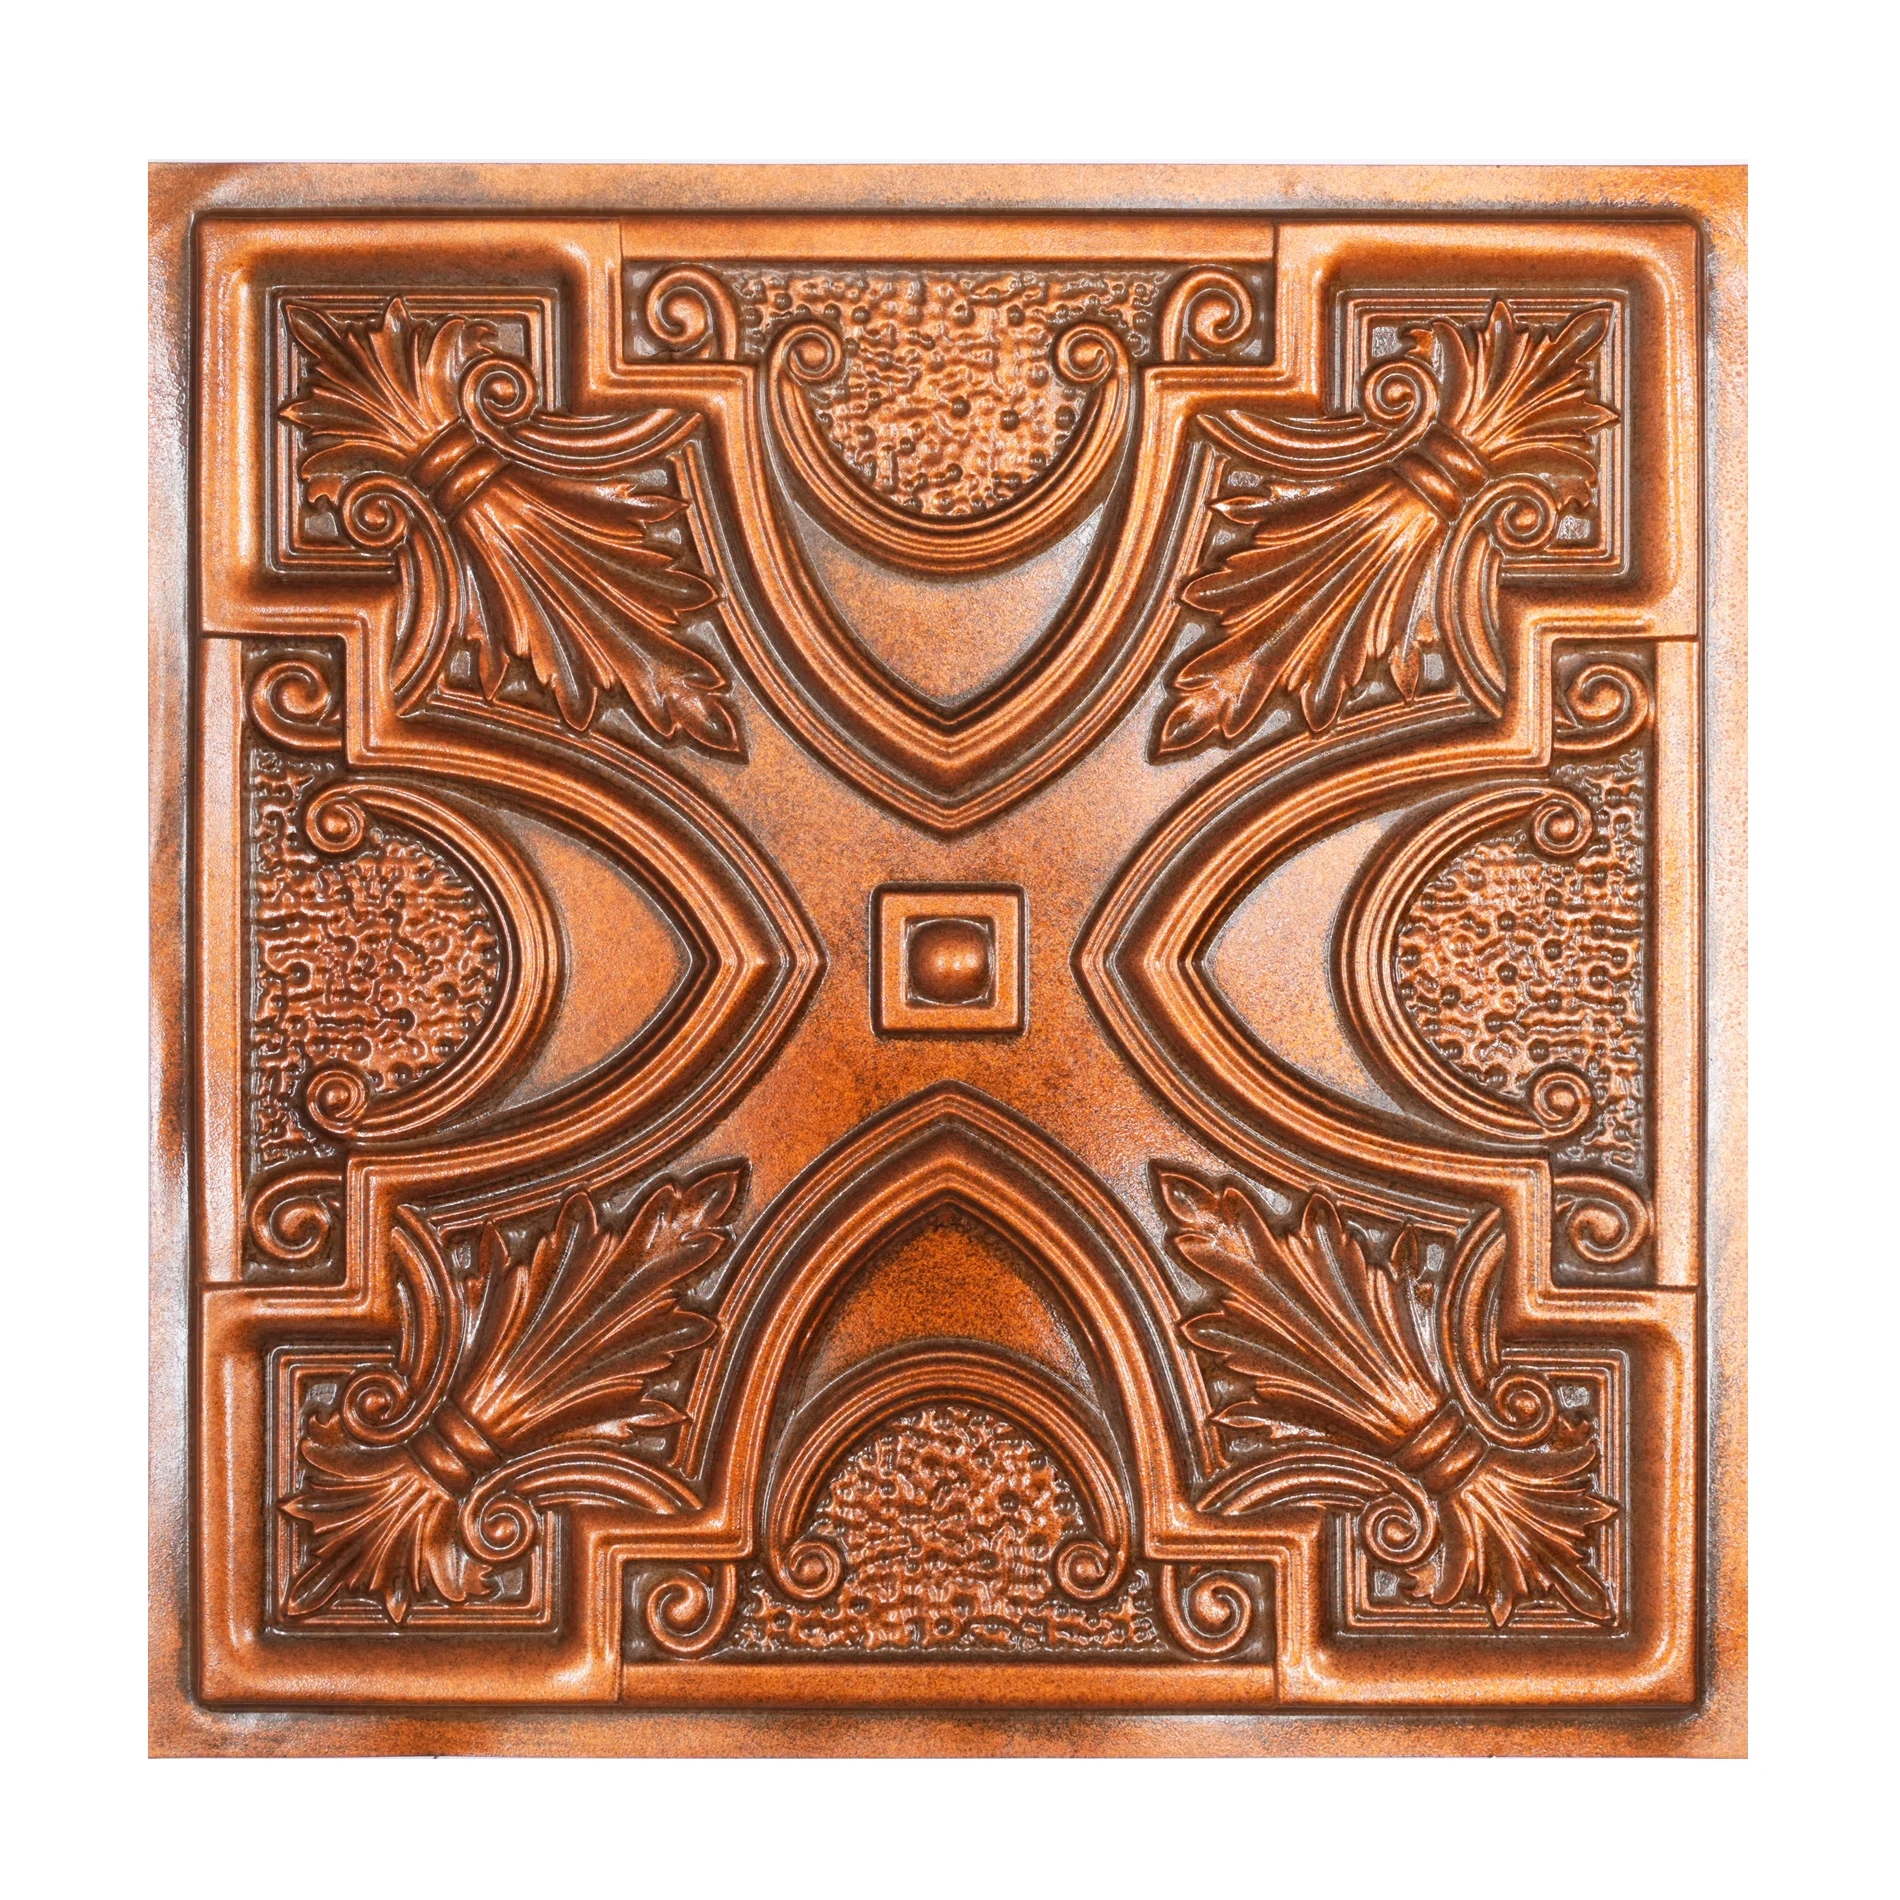 Vintage ceiling tin tiles 3D embossed wall board Drop in ceiling panels PL11 archaic copper